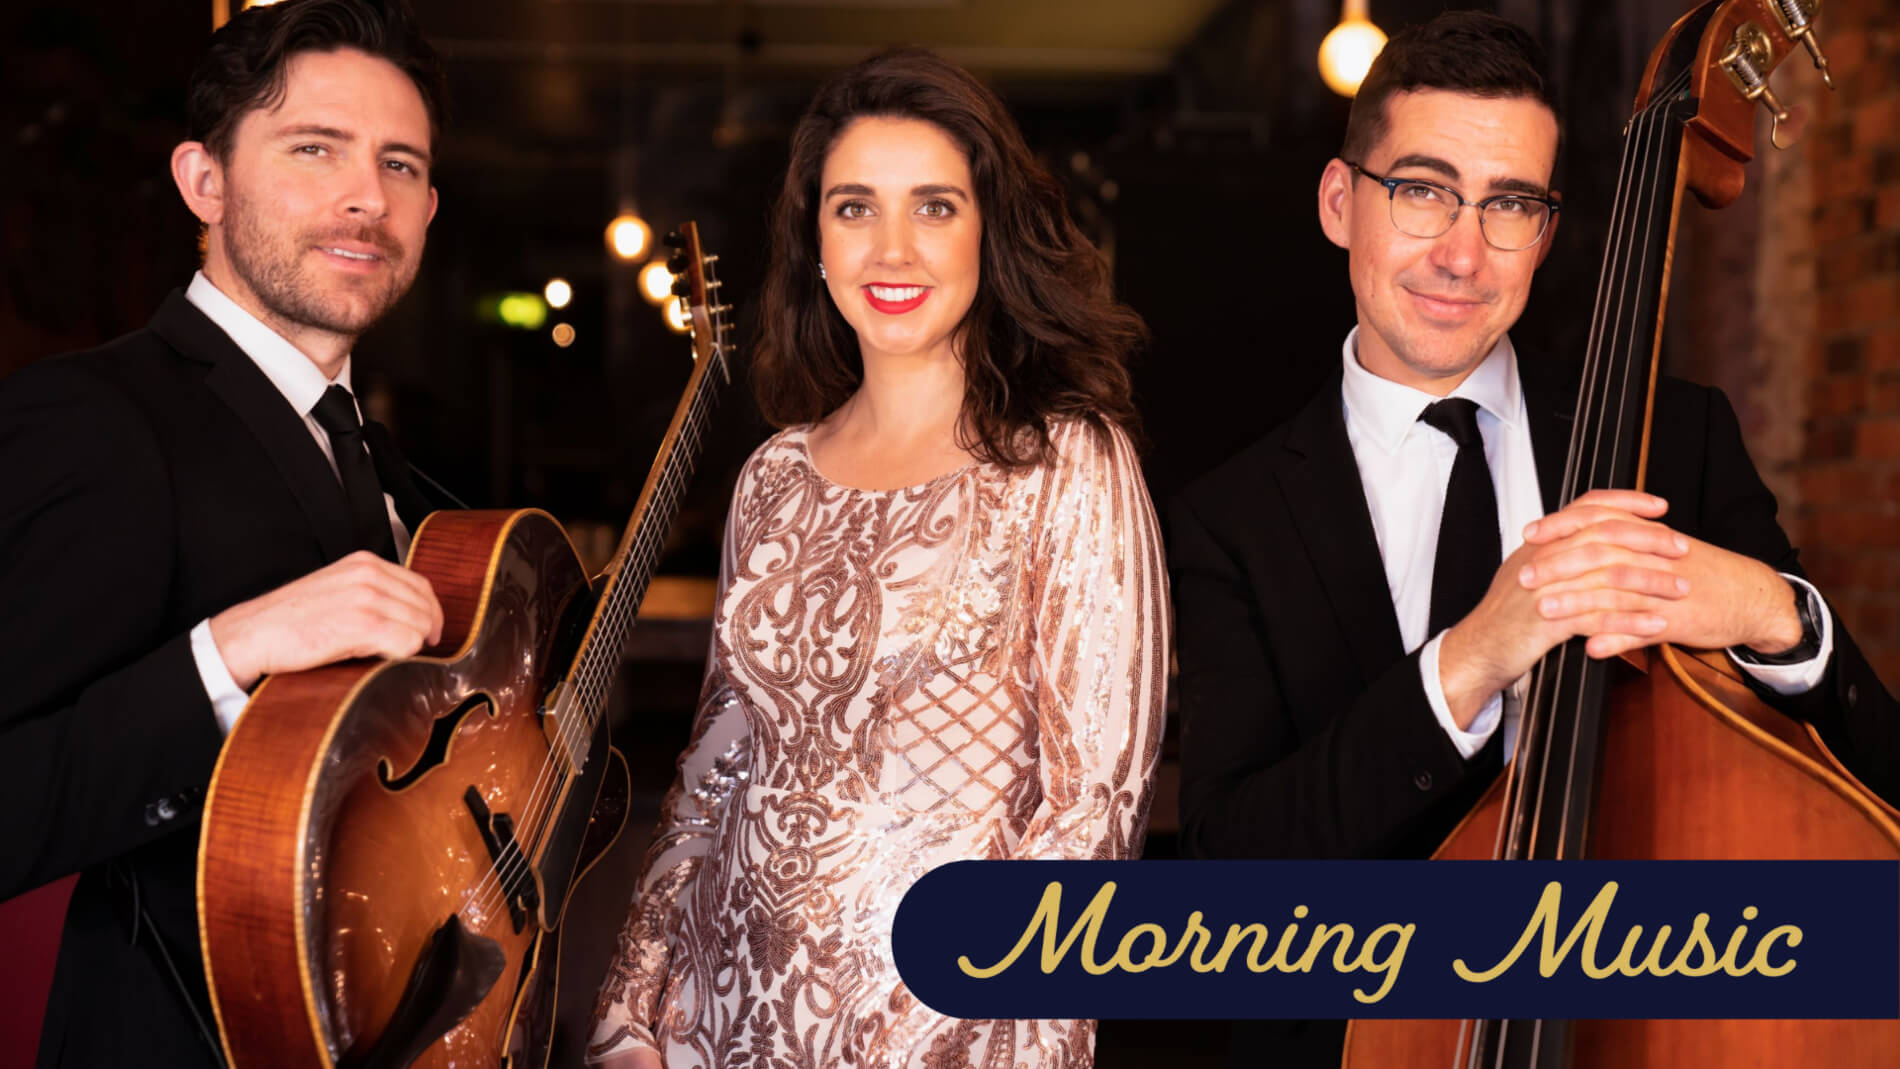 Lisa Woodbrook Jazz Trio featuring in our June 2022 Morning Music Program